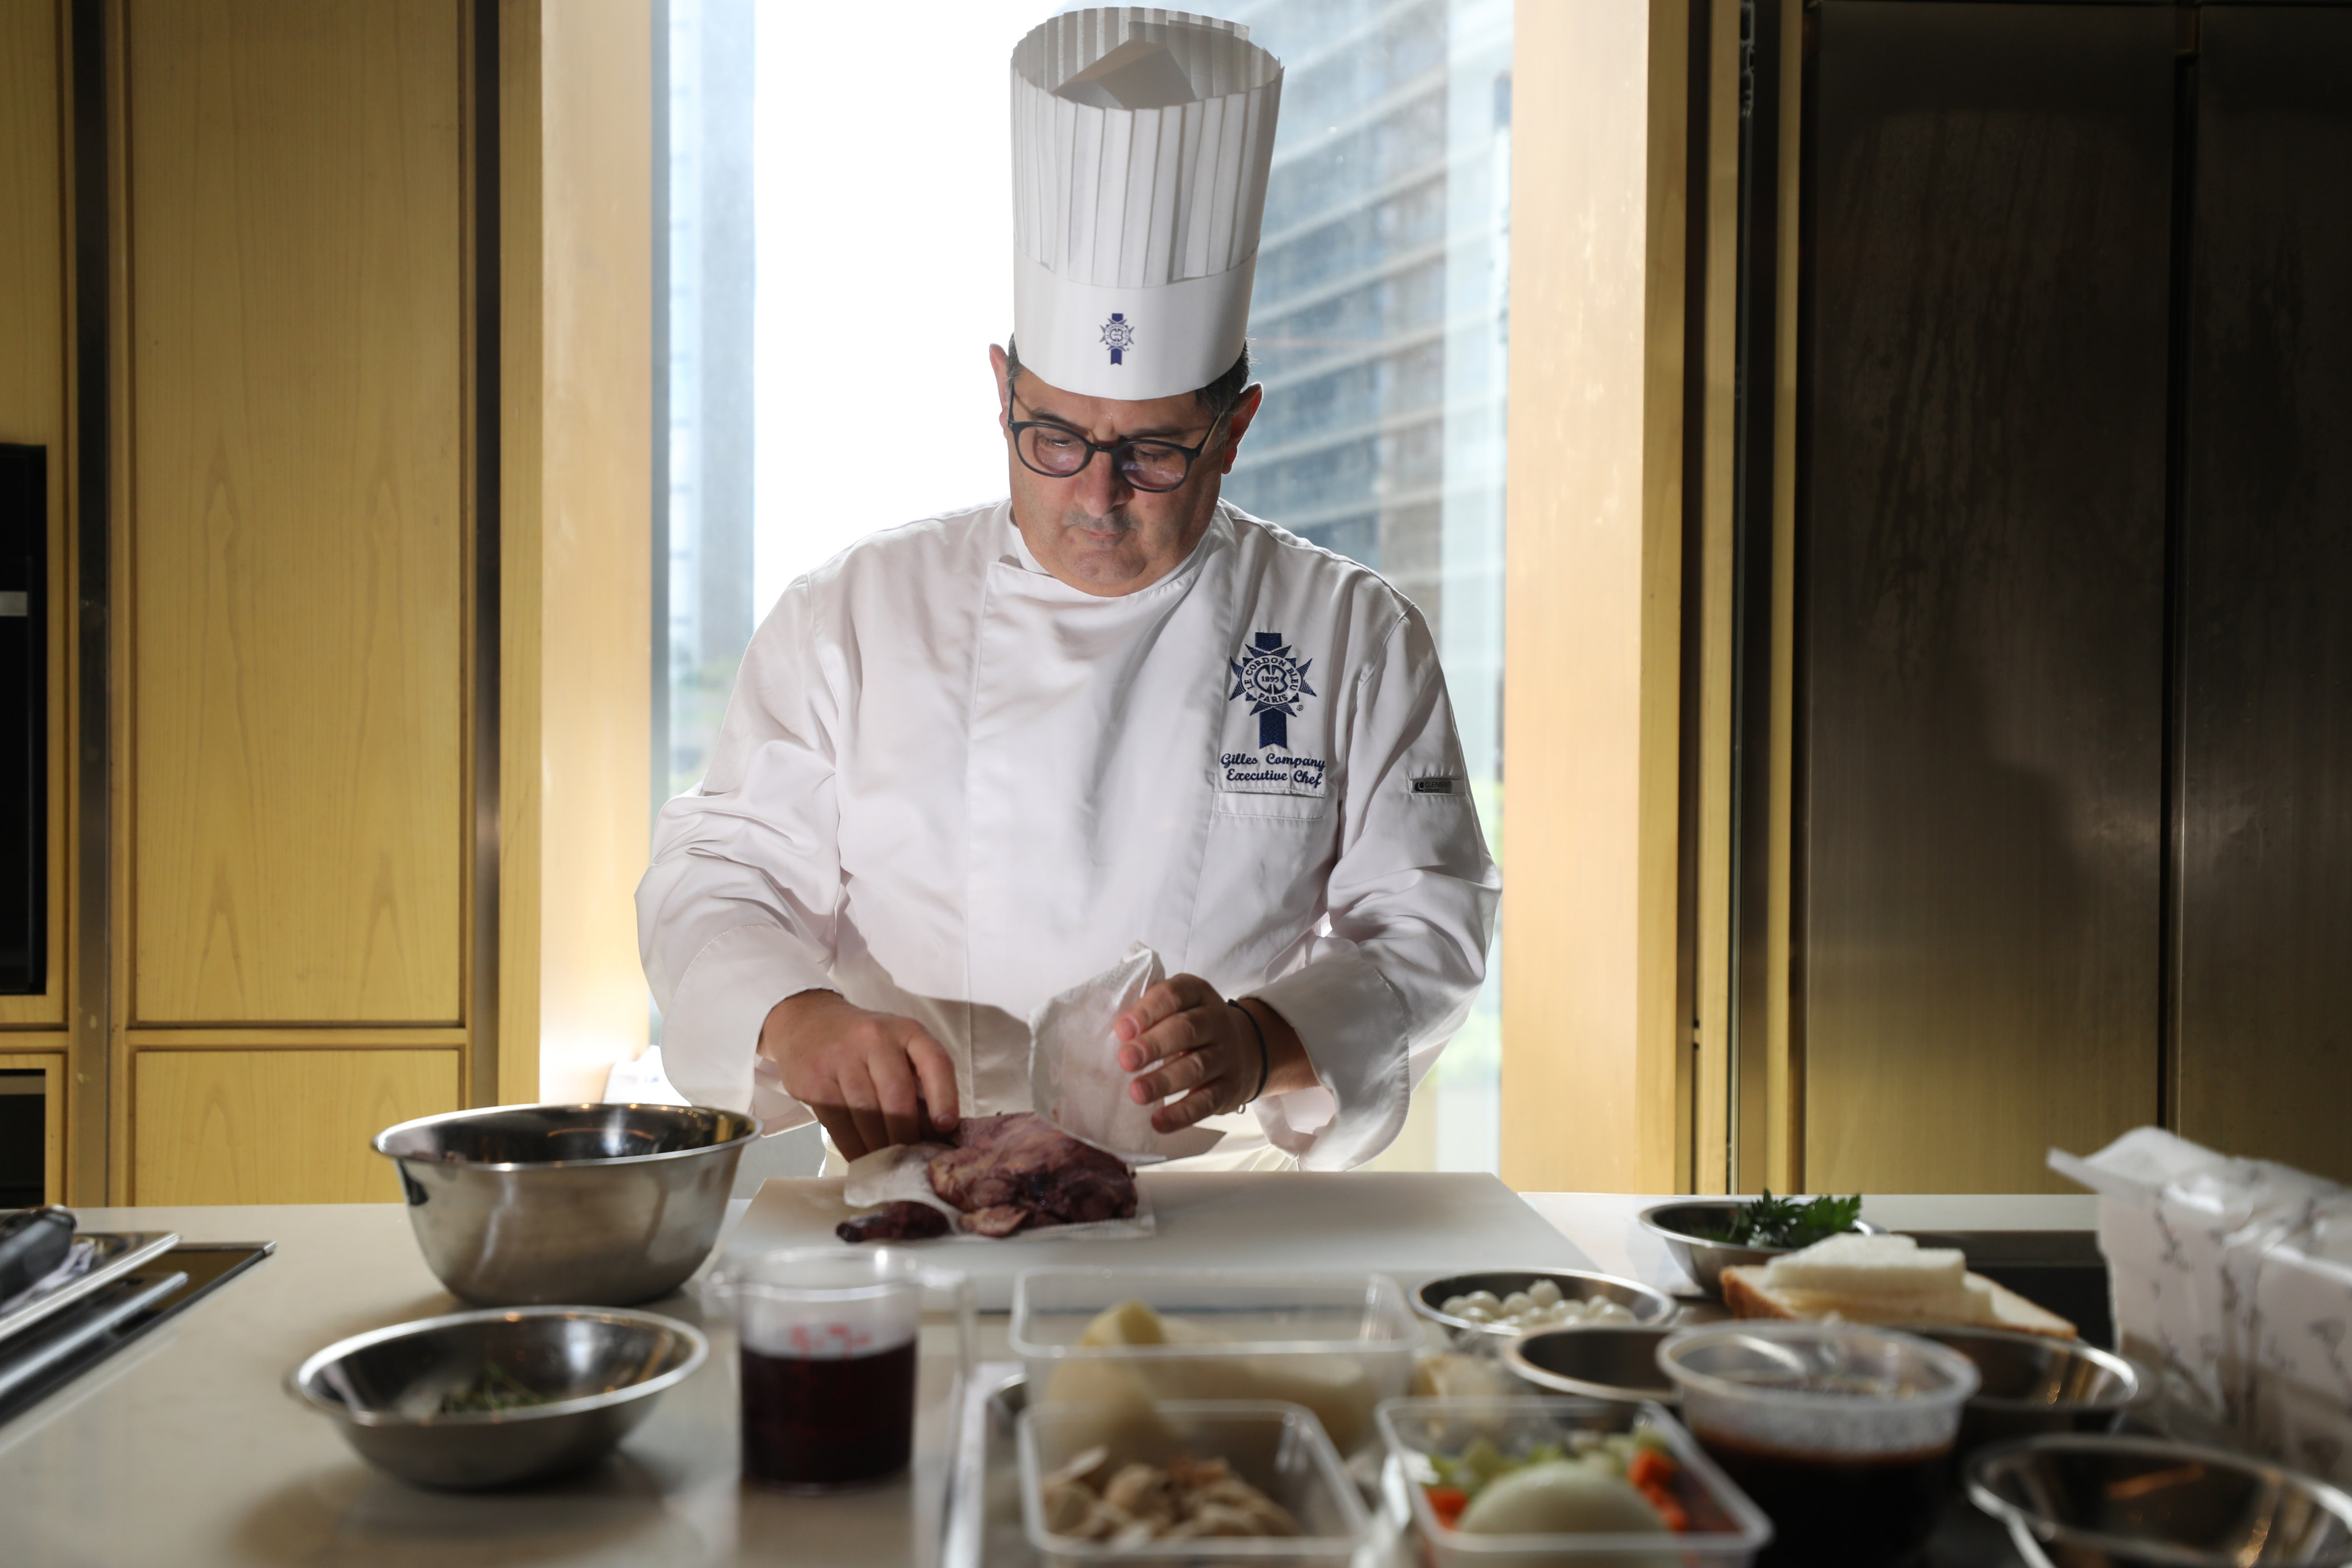 Chef Gilles Company, the culinary academic director of Le Cordon Bleu Japan, is teaching in the programme of workshops at Hong Kong’s K11 Musea mall, which will run until July 19. Photo: Xiaomei Chen